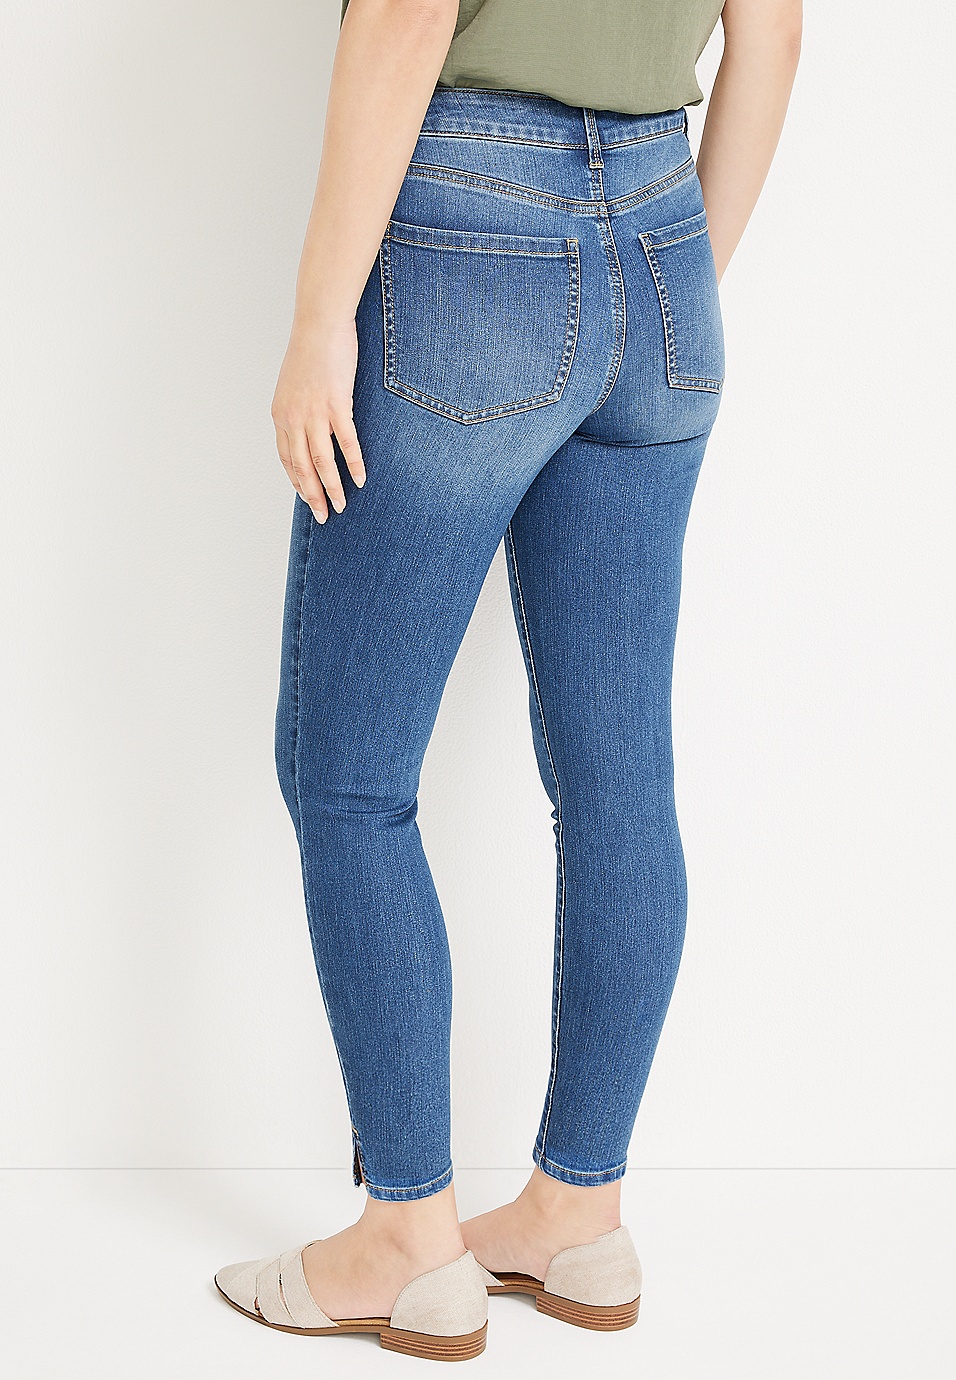 m jeans by maurices™ Everflex™ Mid Fit Mid Rise Slim Boot Jean